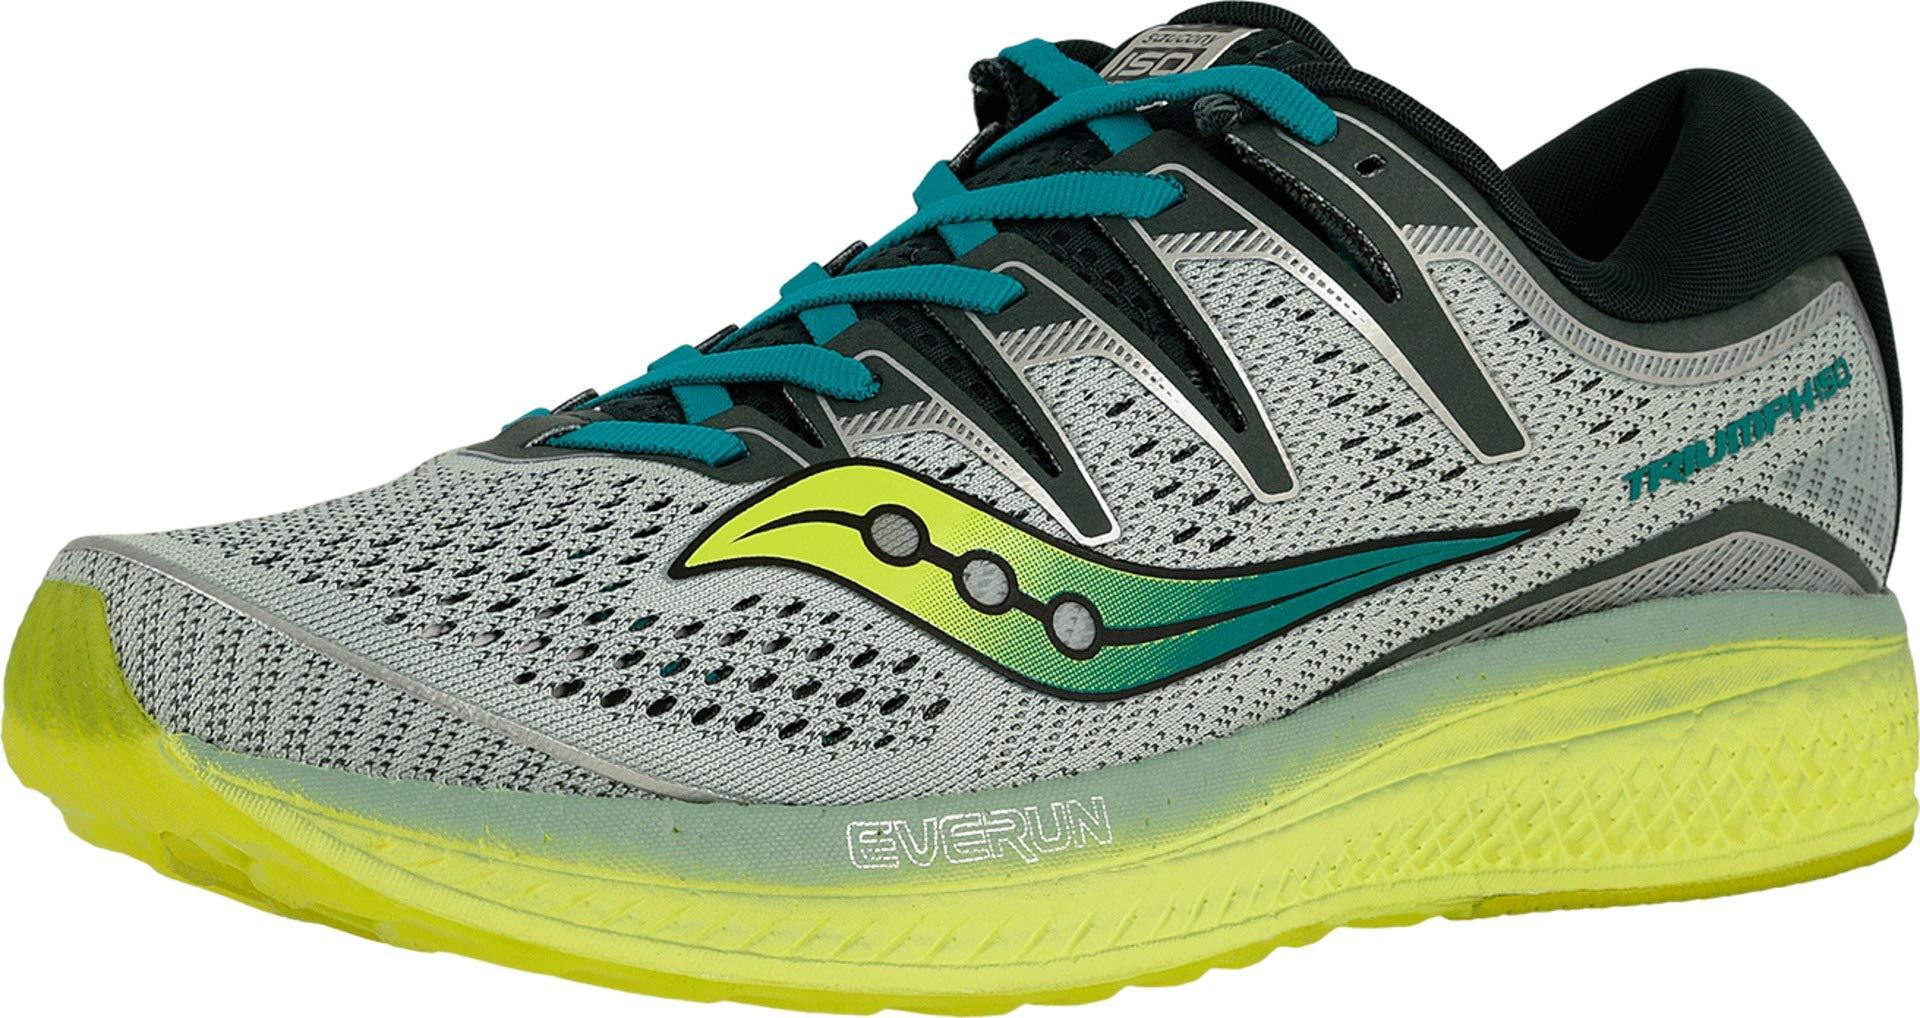 Saucony Synthetic Triumph Iso 5 in Green for Men - Lyst